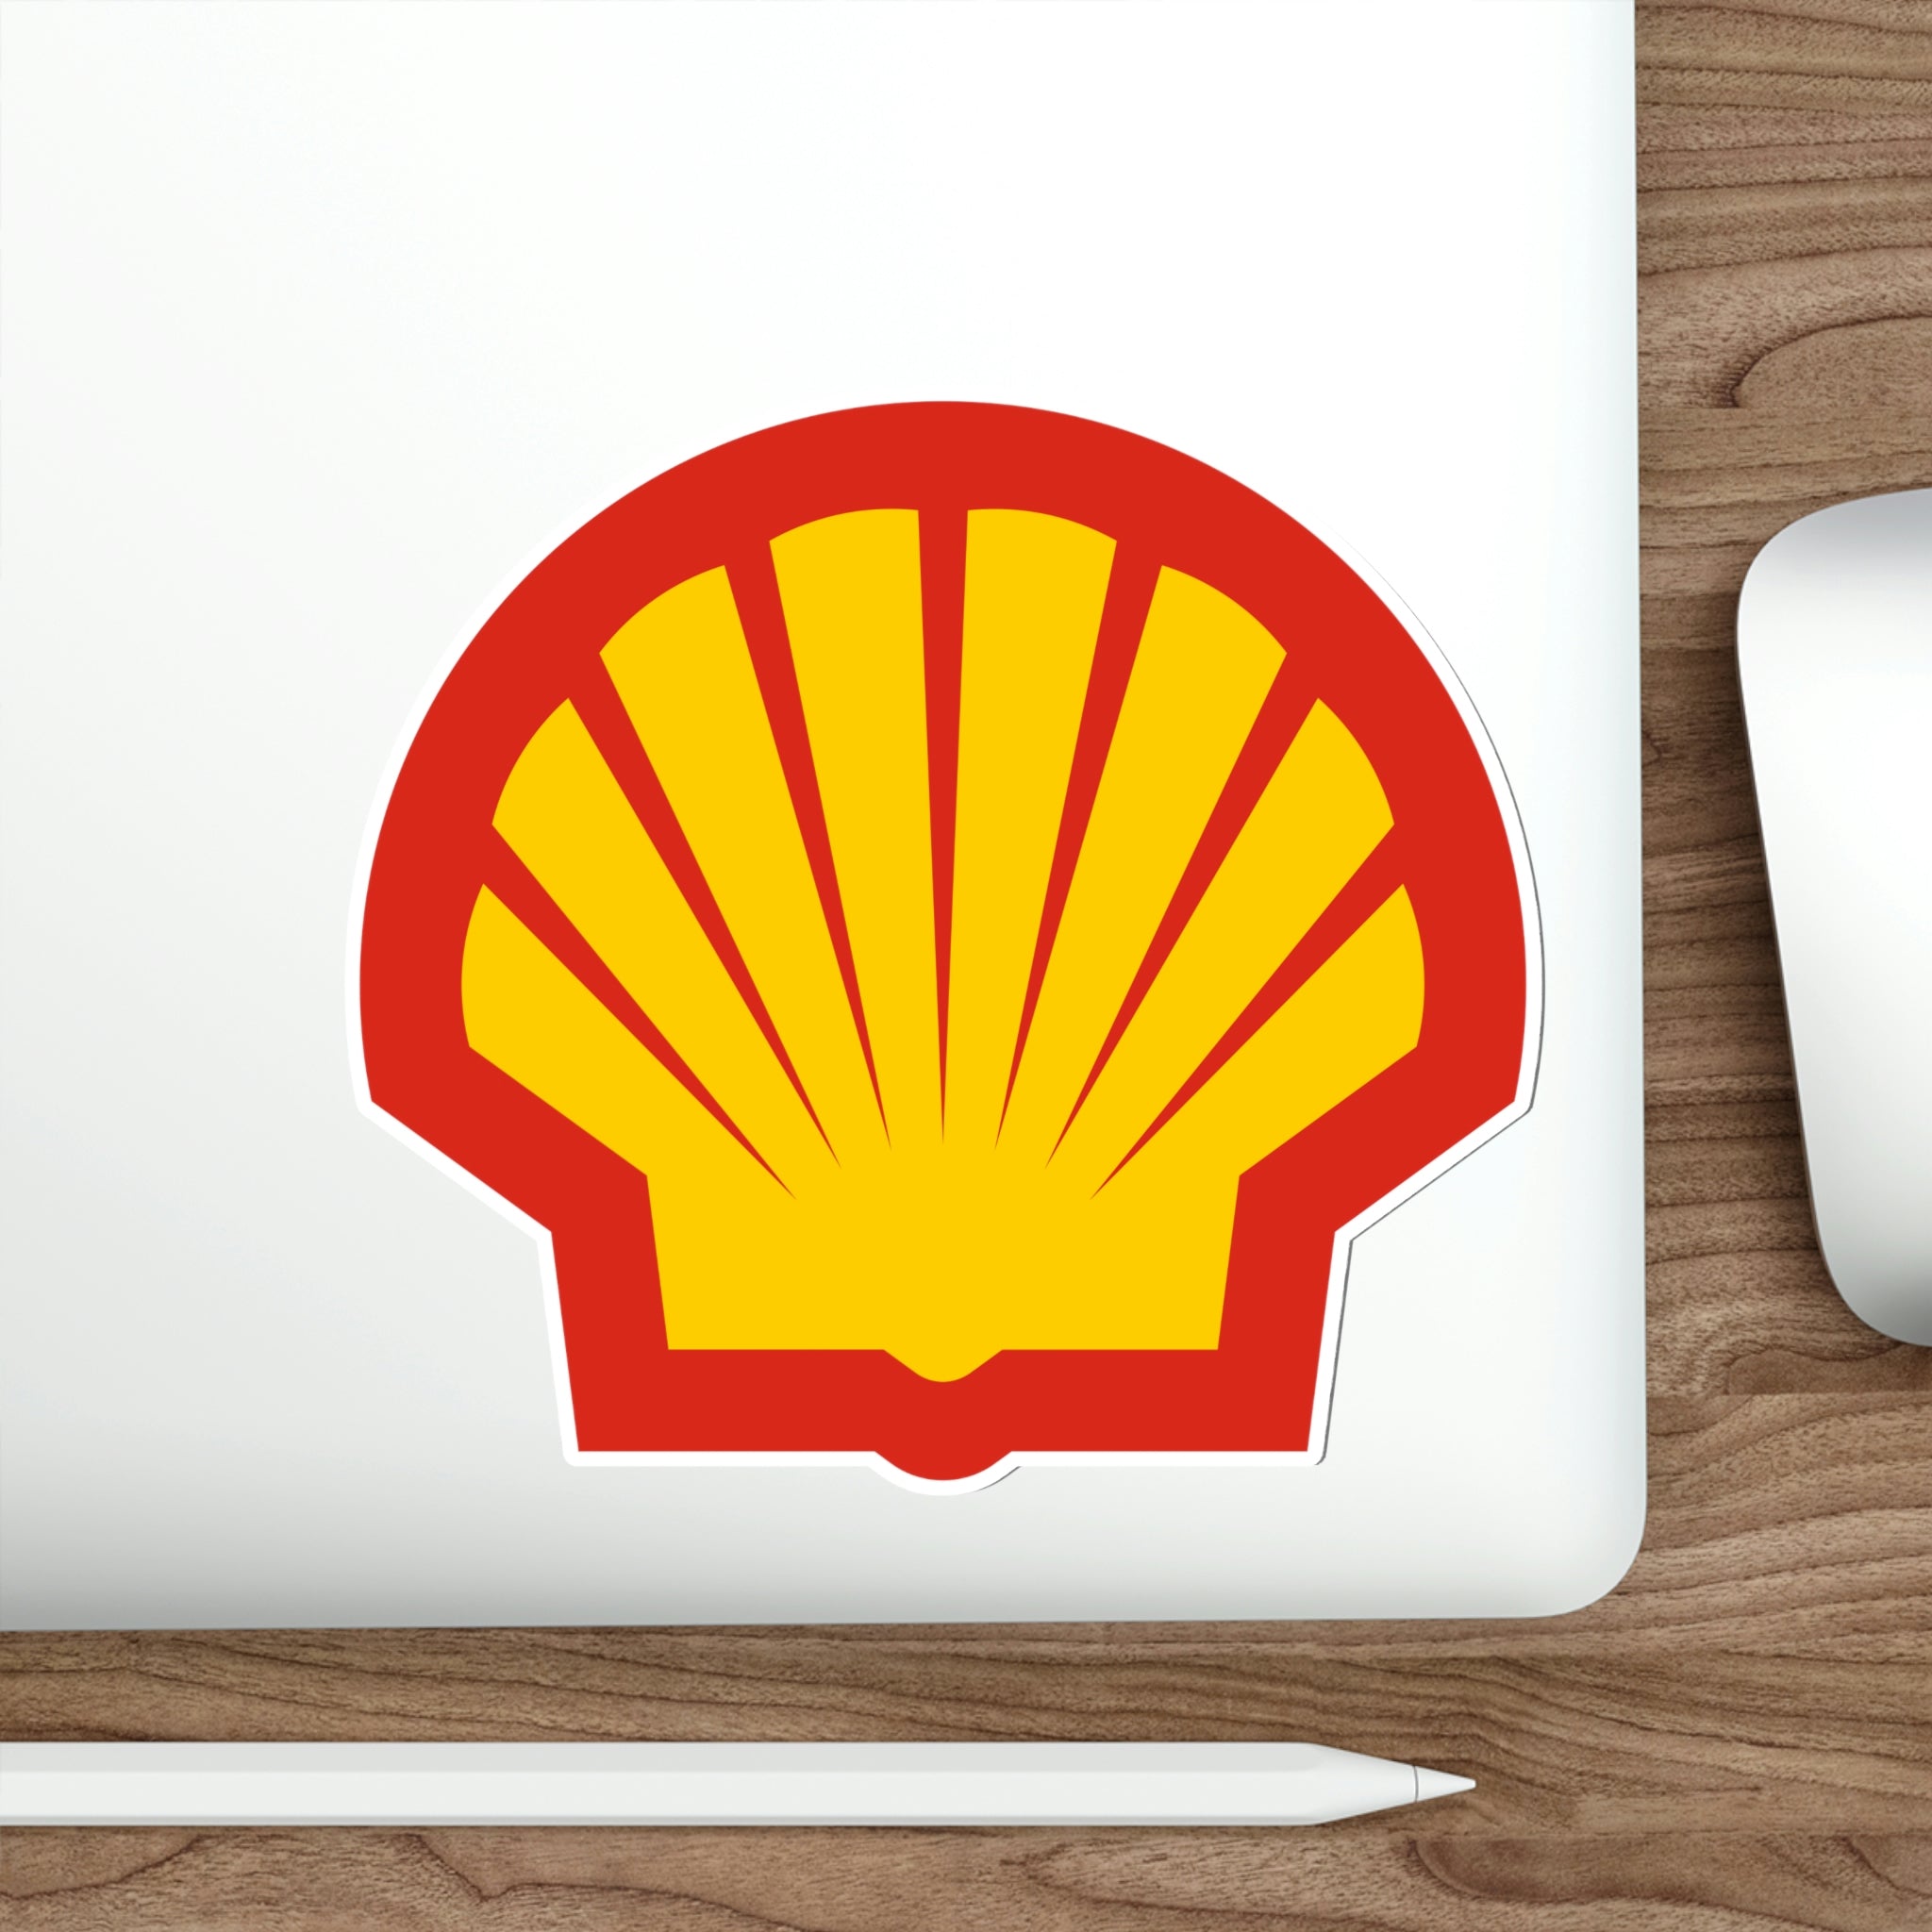 Shell Logo Redesigned 2018 Version 3 by CreativeDyslexic on DeviantArt